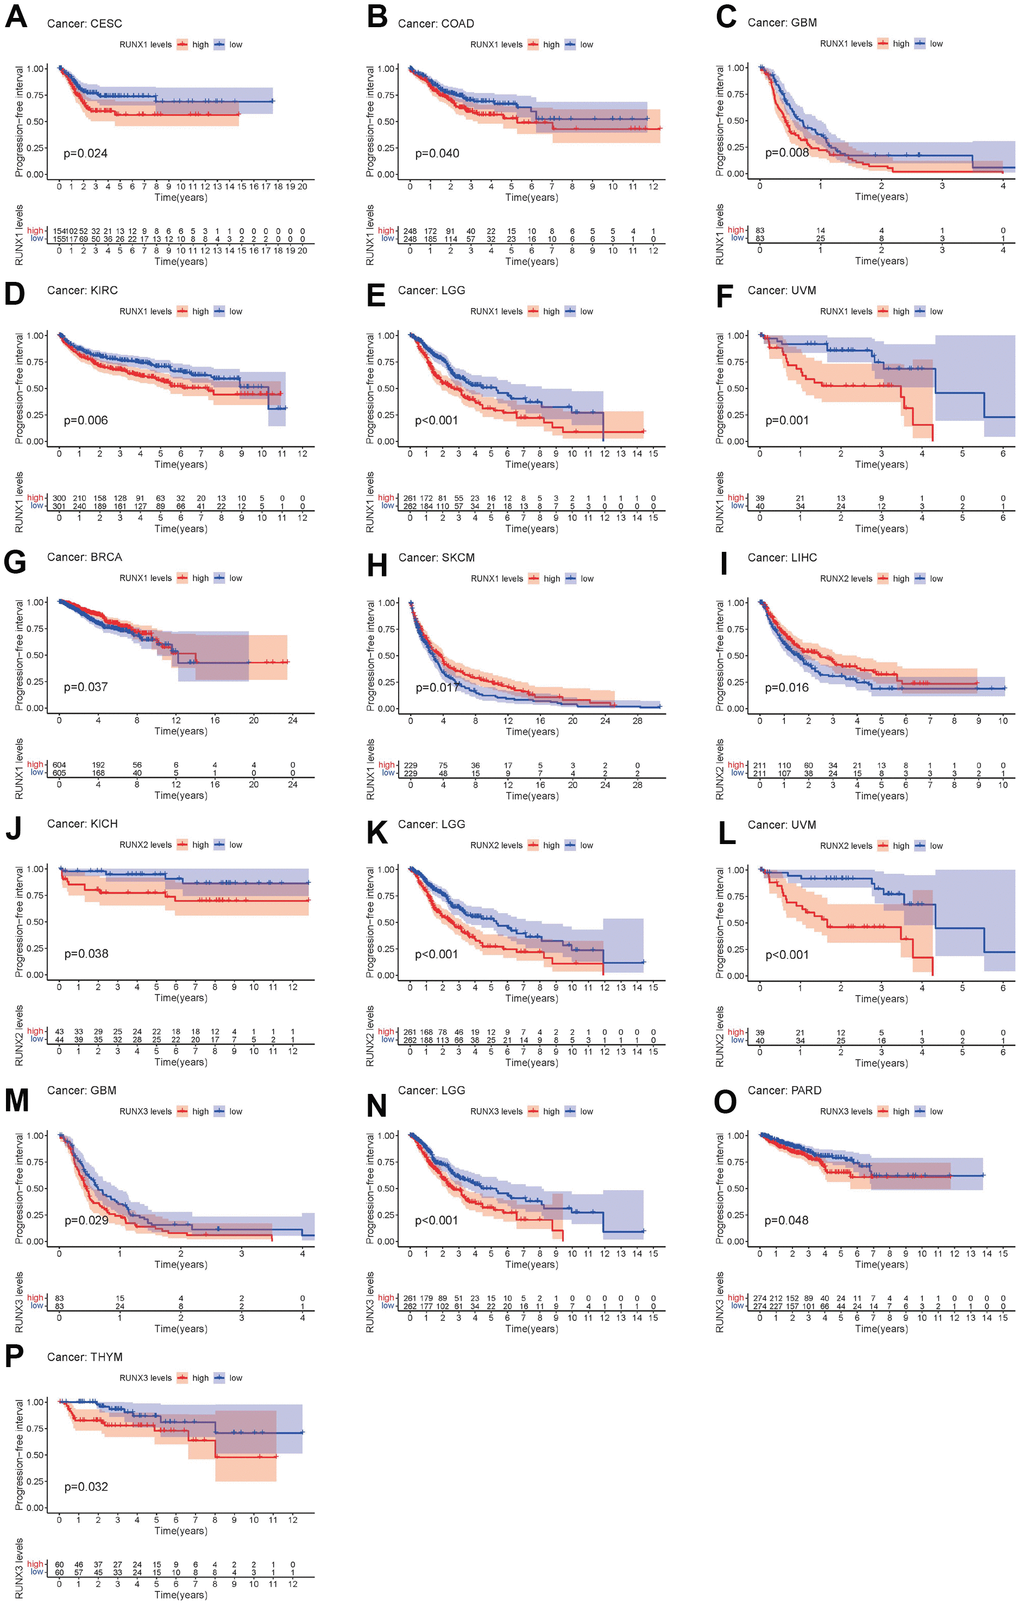 Kaplan–Meier survival curves comparing pan-cancer high and low expression of RUNX gene family genes. PFI survival curves for RUNX1 in different cancers: (A) CESC, (B) COAD, (C) GBM, (D) KIRC, (E) LGG, (F) UVM, (G) BRCA, (H) SKCM. PFI survival curves for RUNX2 in different cancers: (I) LIHC, (J) KICH, (K) LGG, (L) UVM. PFI survival curves for RUNX3 in different cancers: (M) GBM, (N) LGG, (O) PARD, (P) THYM.